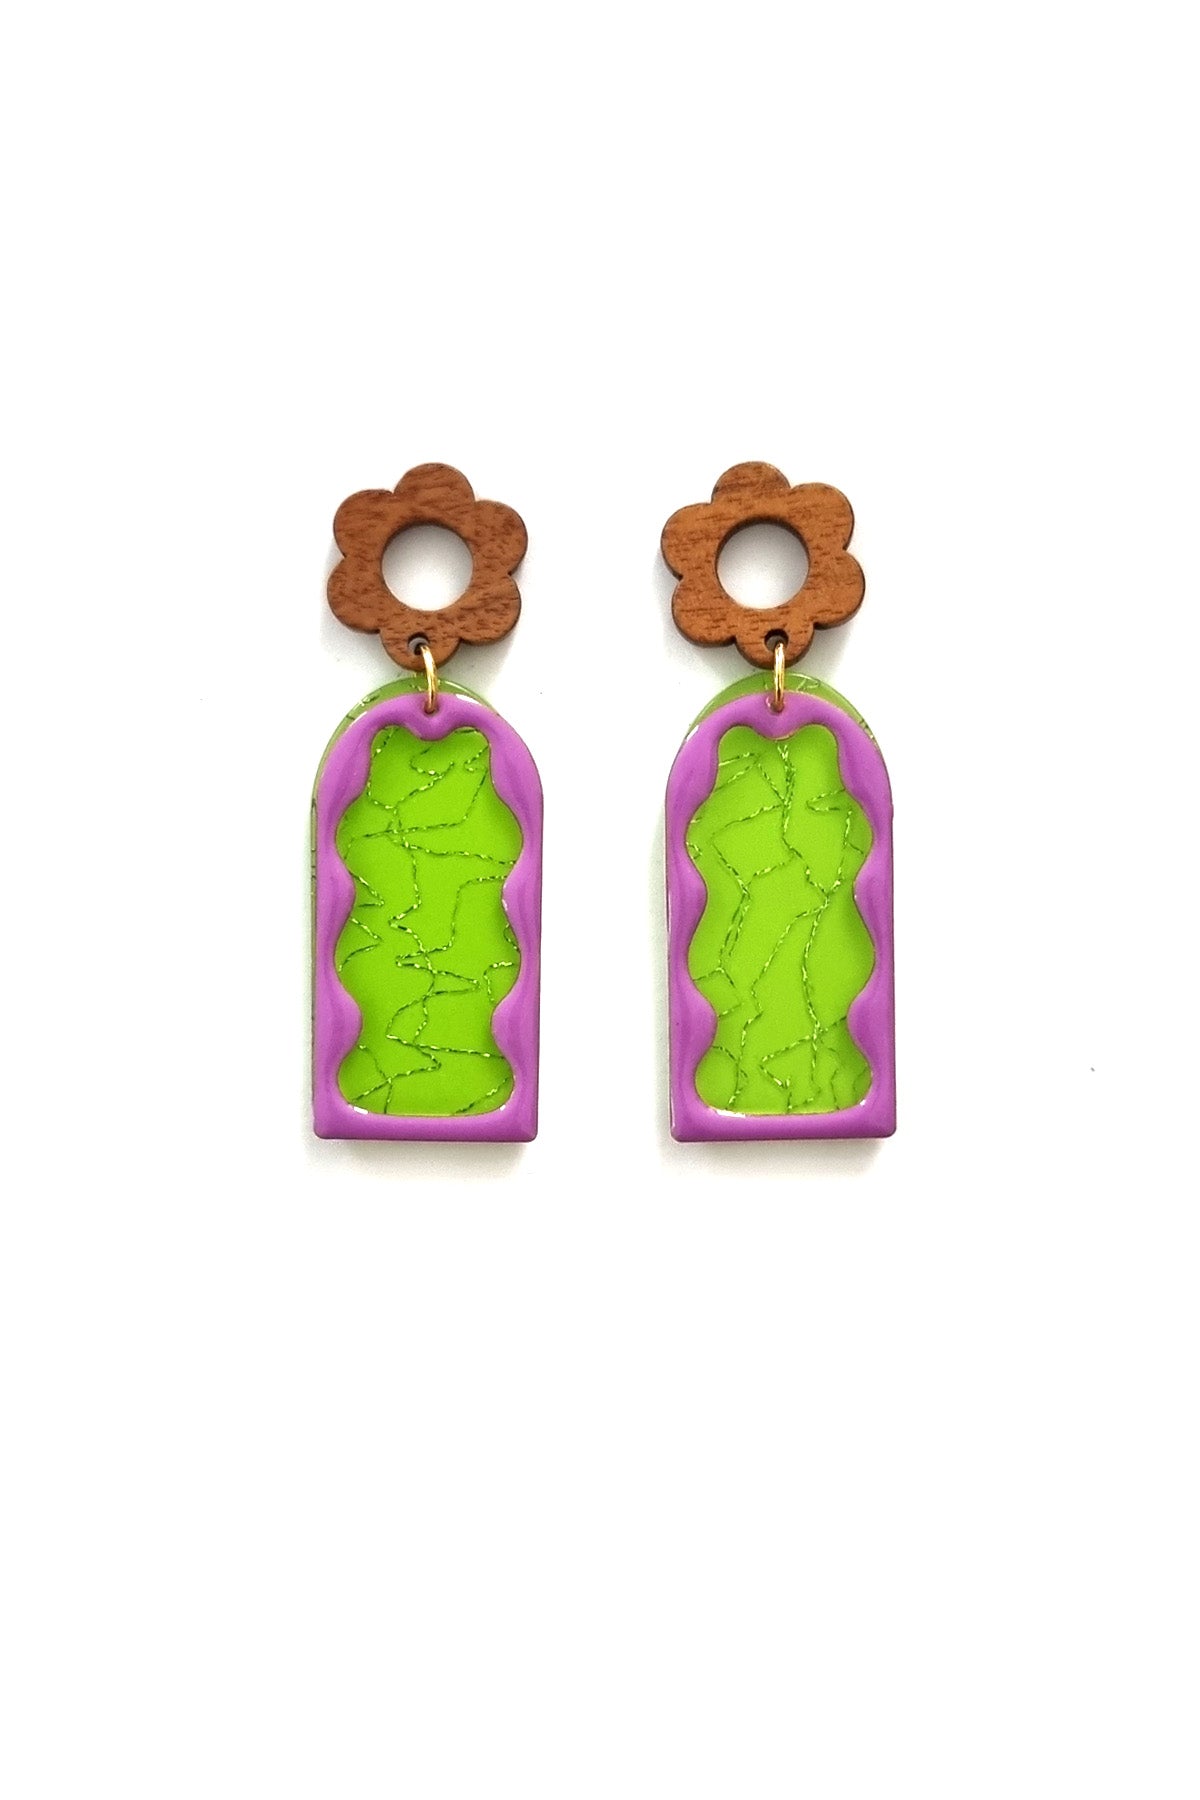 A pair of stud dangle earrings lay against a white background. They feature a wooden flower stud top followed by a green acrylic arch with a silver thread detail. On top sits an enamel wavy arch frame in purple.